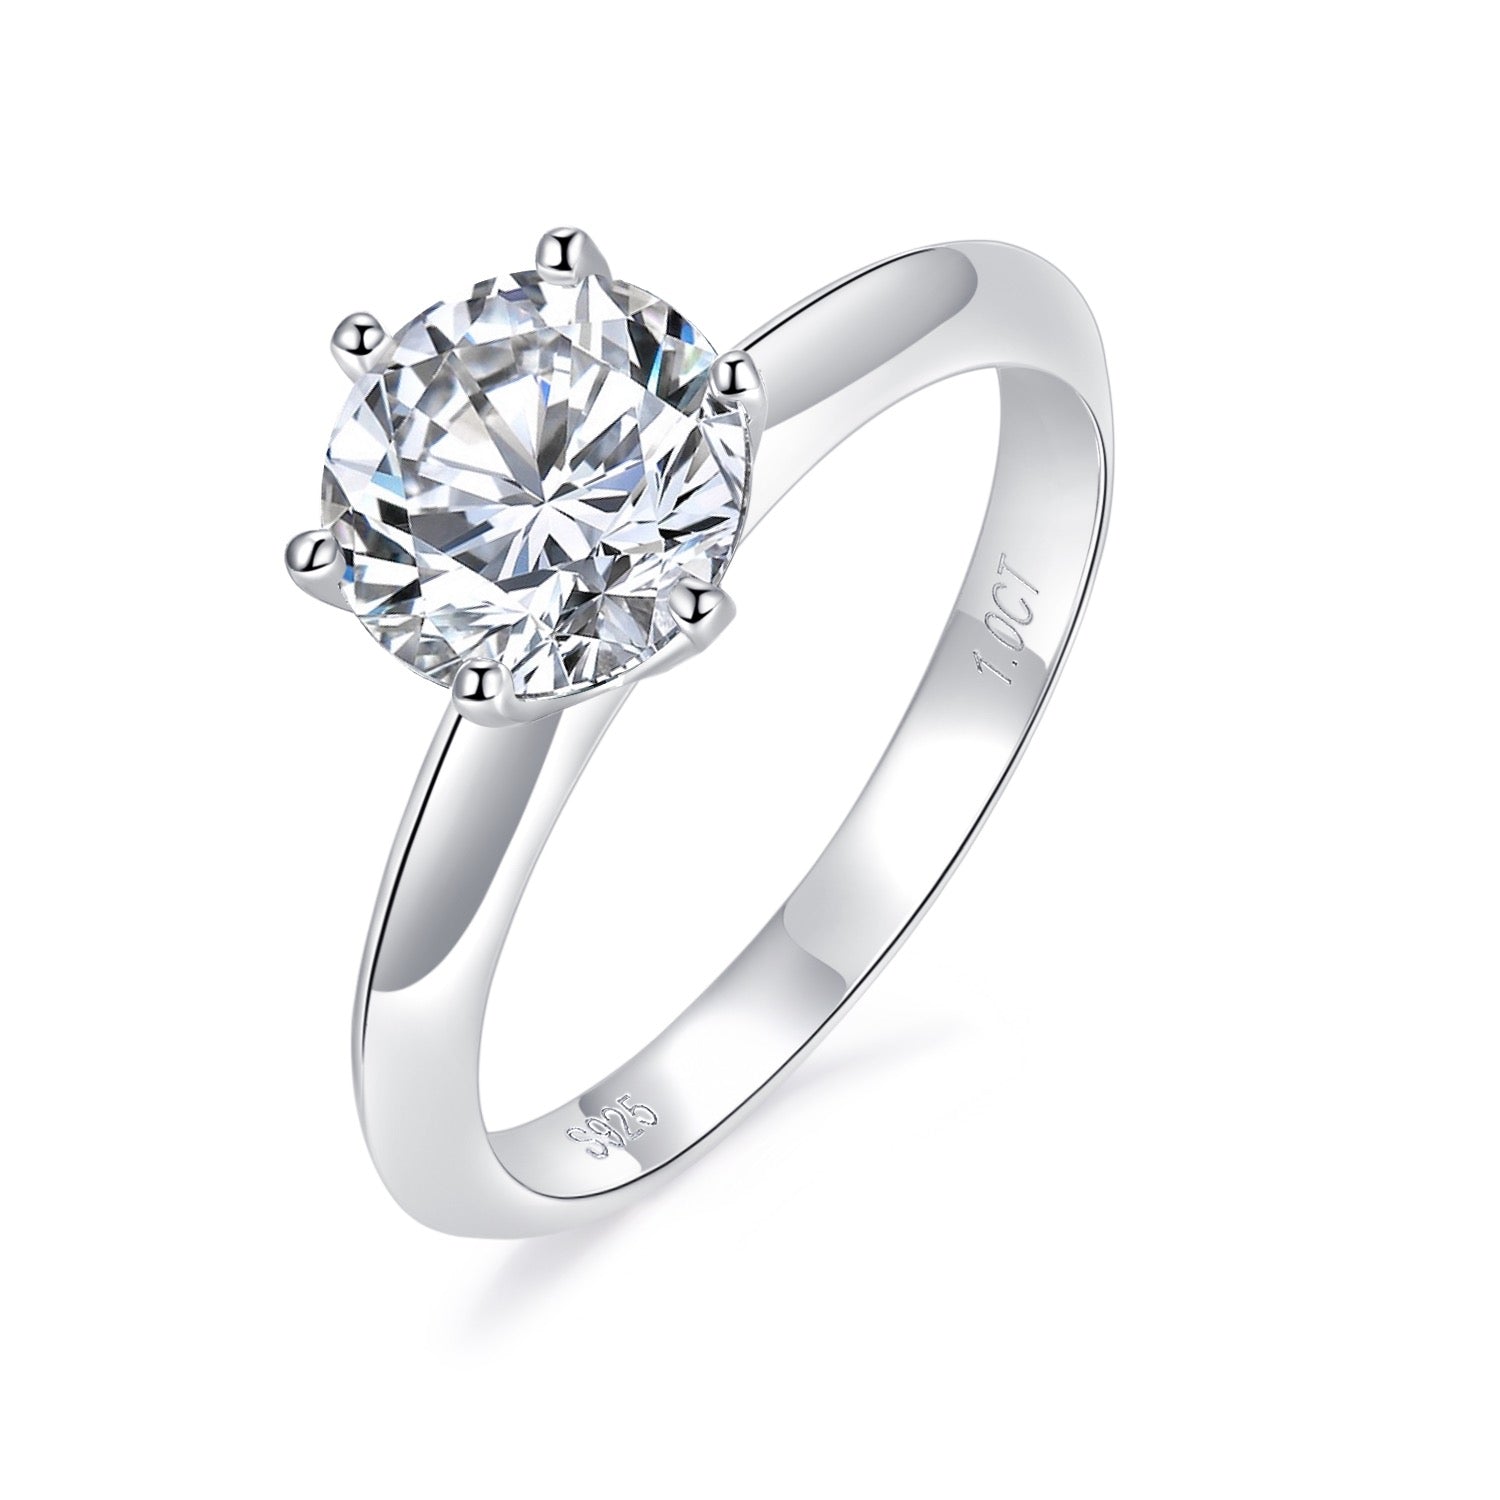 No.3 RM1003 0.5/1.0/2.0/3.0 CTW Classic 6A Moissanite 18K S925 Band Ring